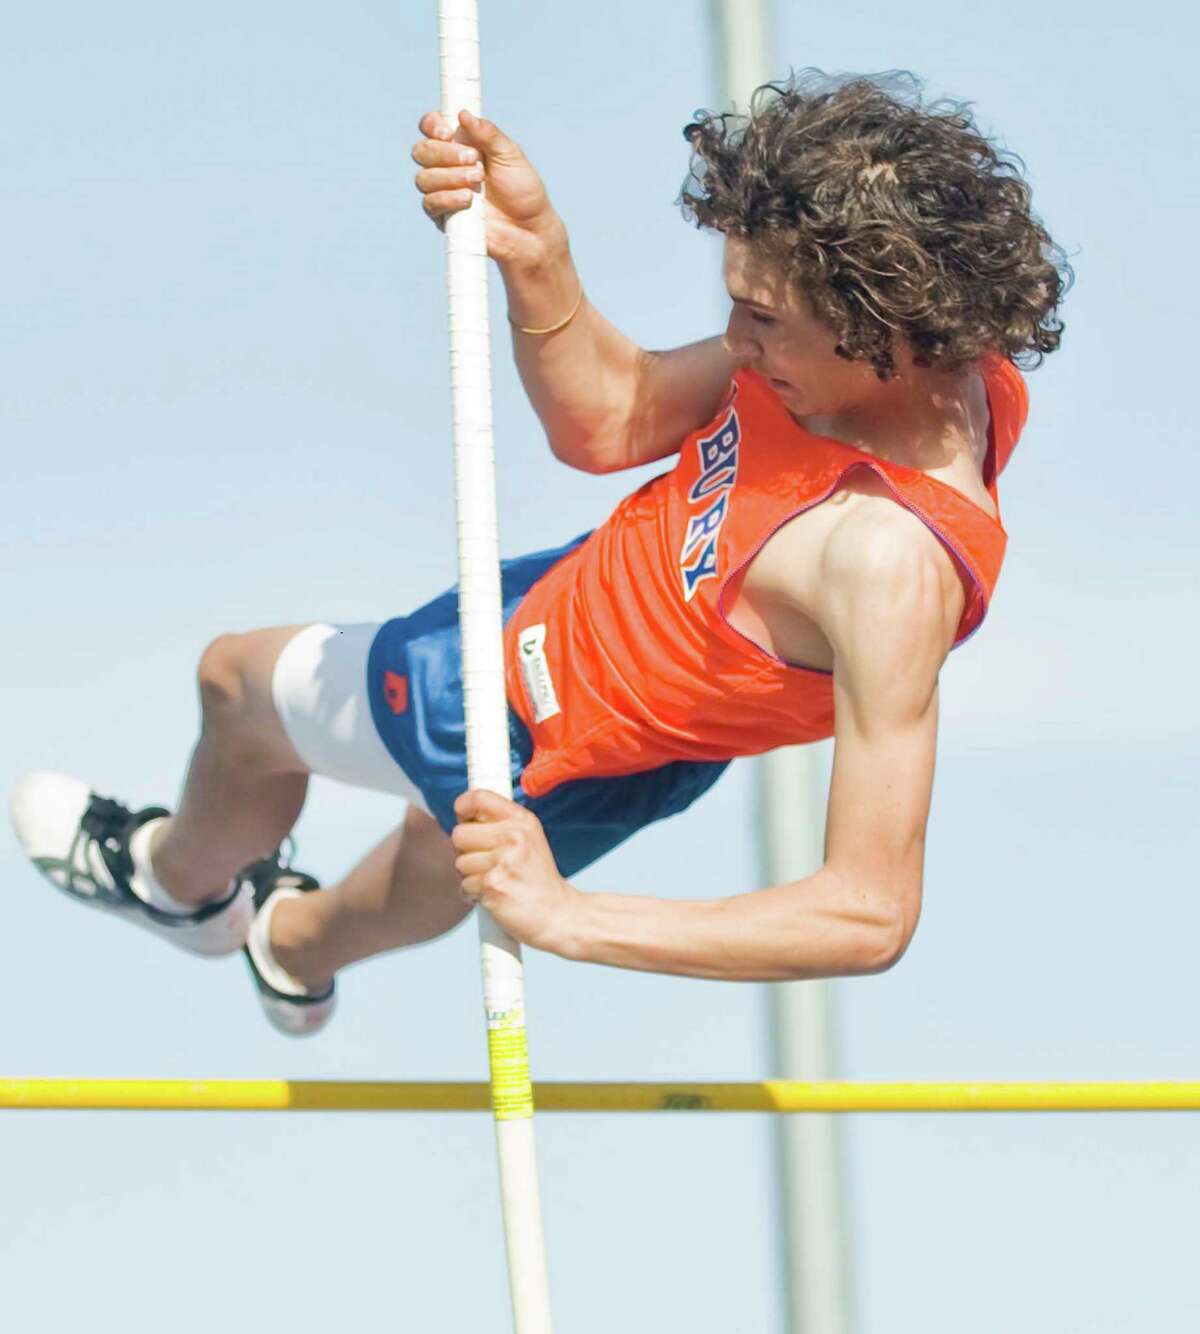 Danbury High School sophomore Alex Troche clears the bar in the pole vault event in the boys track meet at Danbury. Tuesday, April 9, 2013